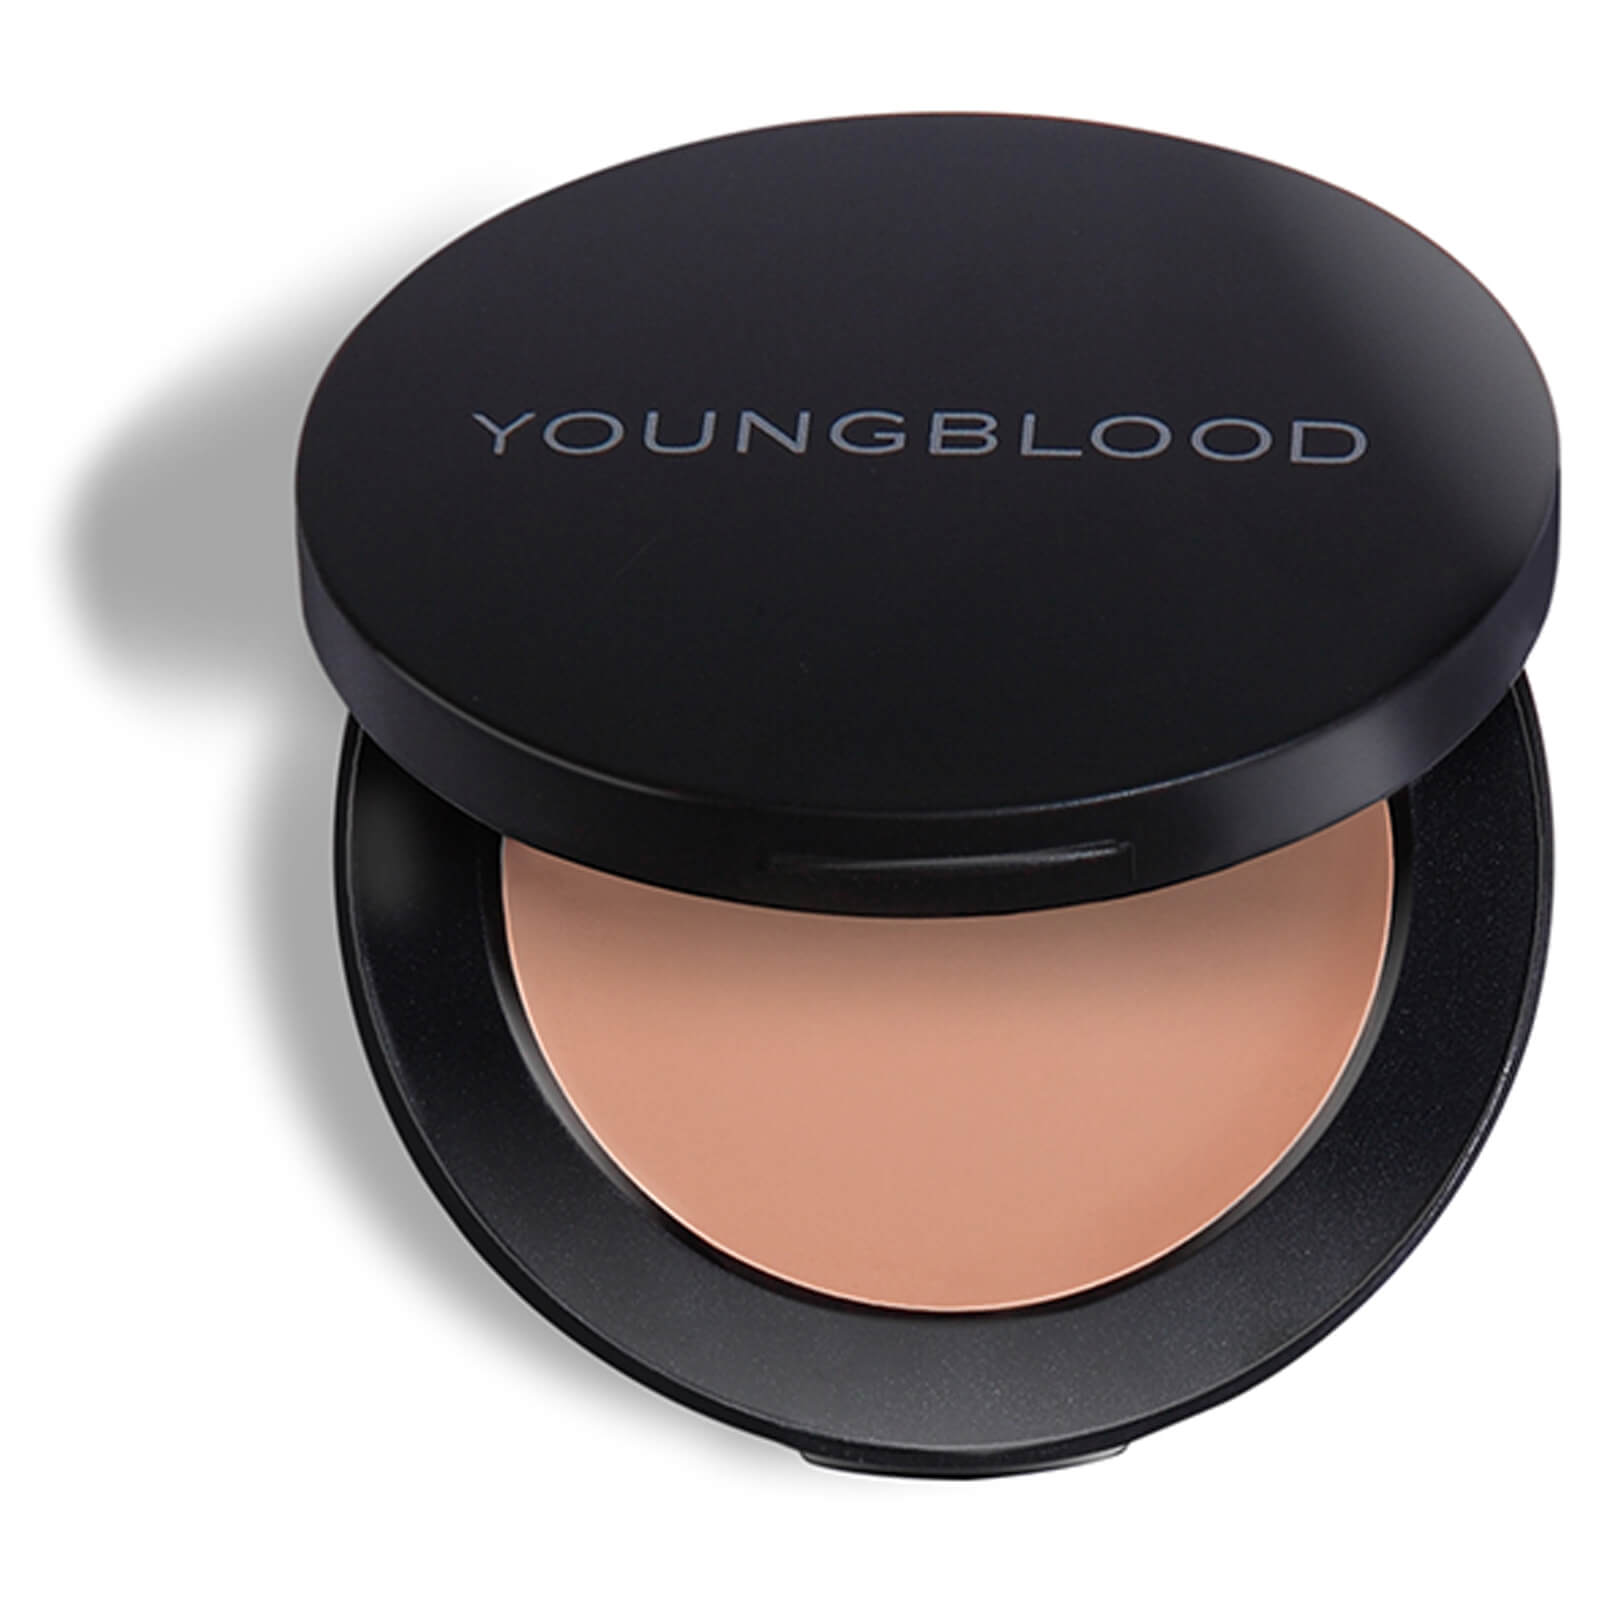 Youngblood Ultimate Concealer 2.8g (Various Shades) - Tan Deep